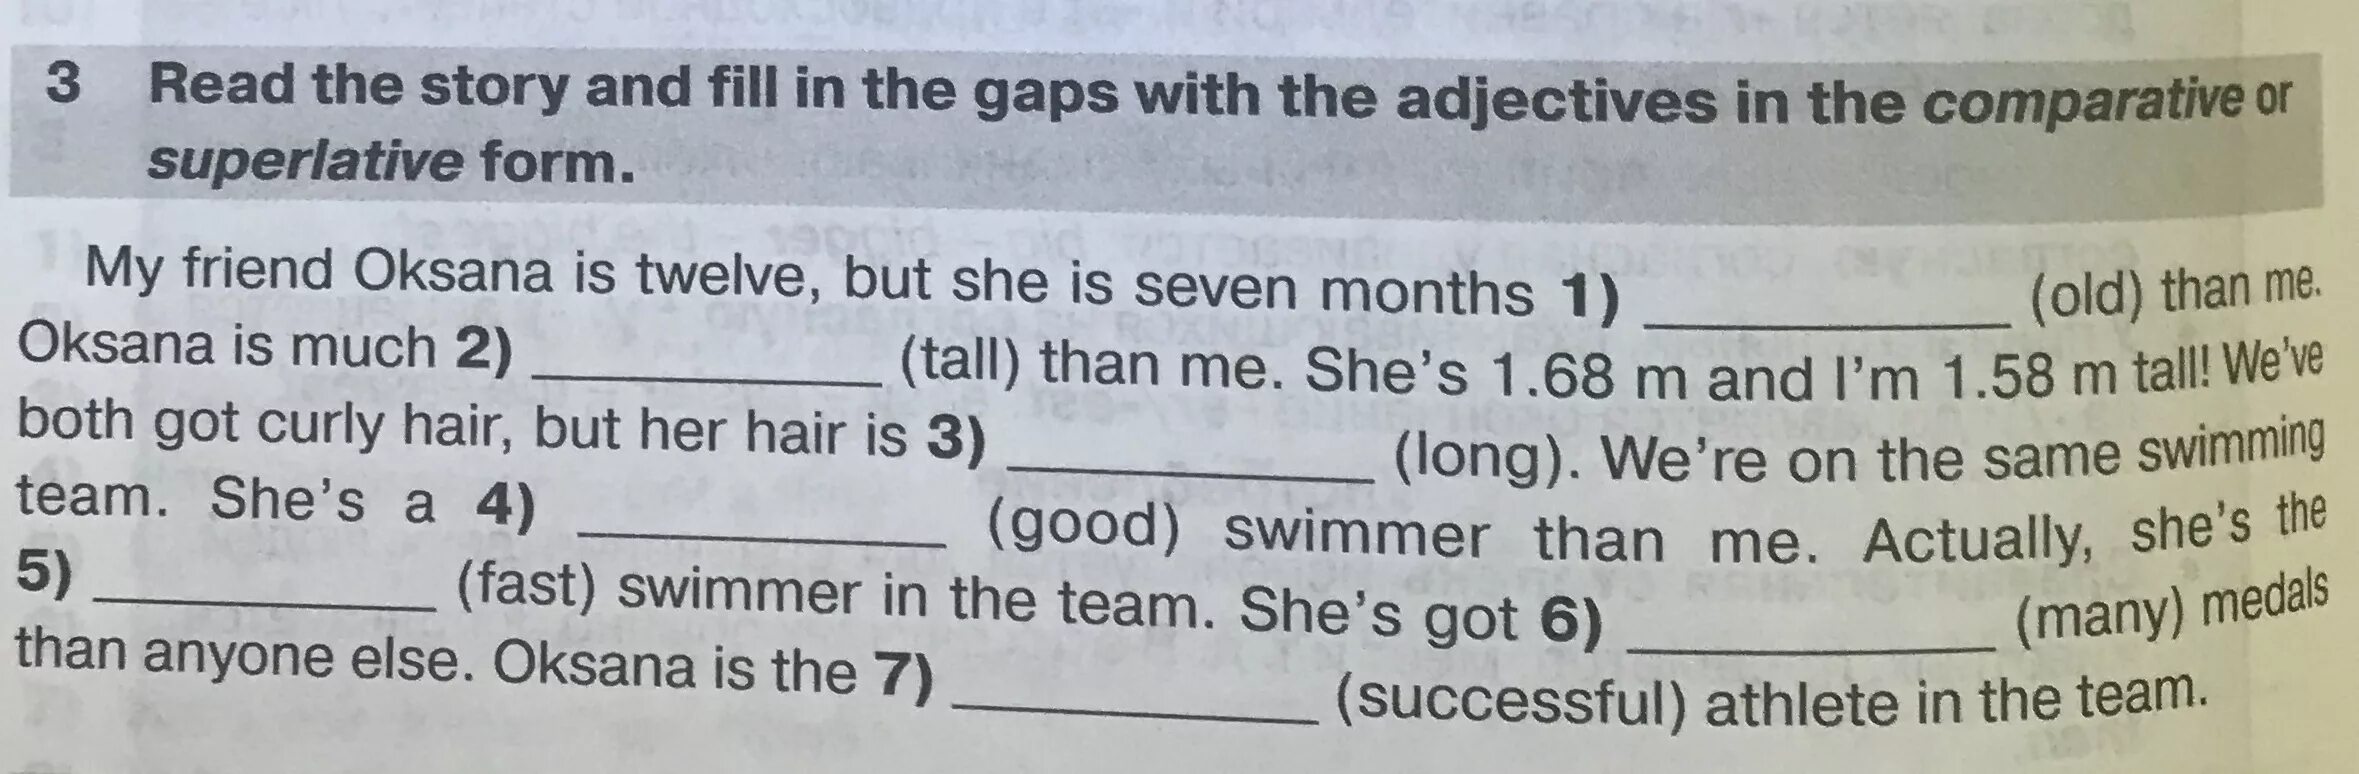 Read the story and fill in the gaps with the adjectives in the Comparative or Superlative form. Read the story and fill in the gaps with the adjectives in the Comparative or Superlative form my friend Oksana. Fill in the gaps with the Comparative or the Superlative form. Comparative adjectives fill in the gaps. Complete the gaps with the right comparative